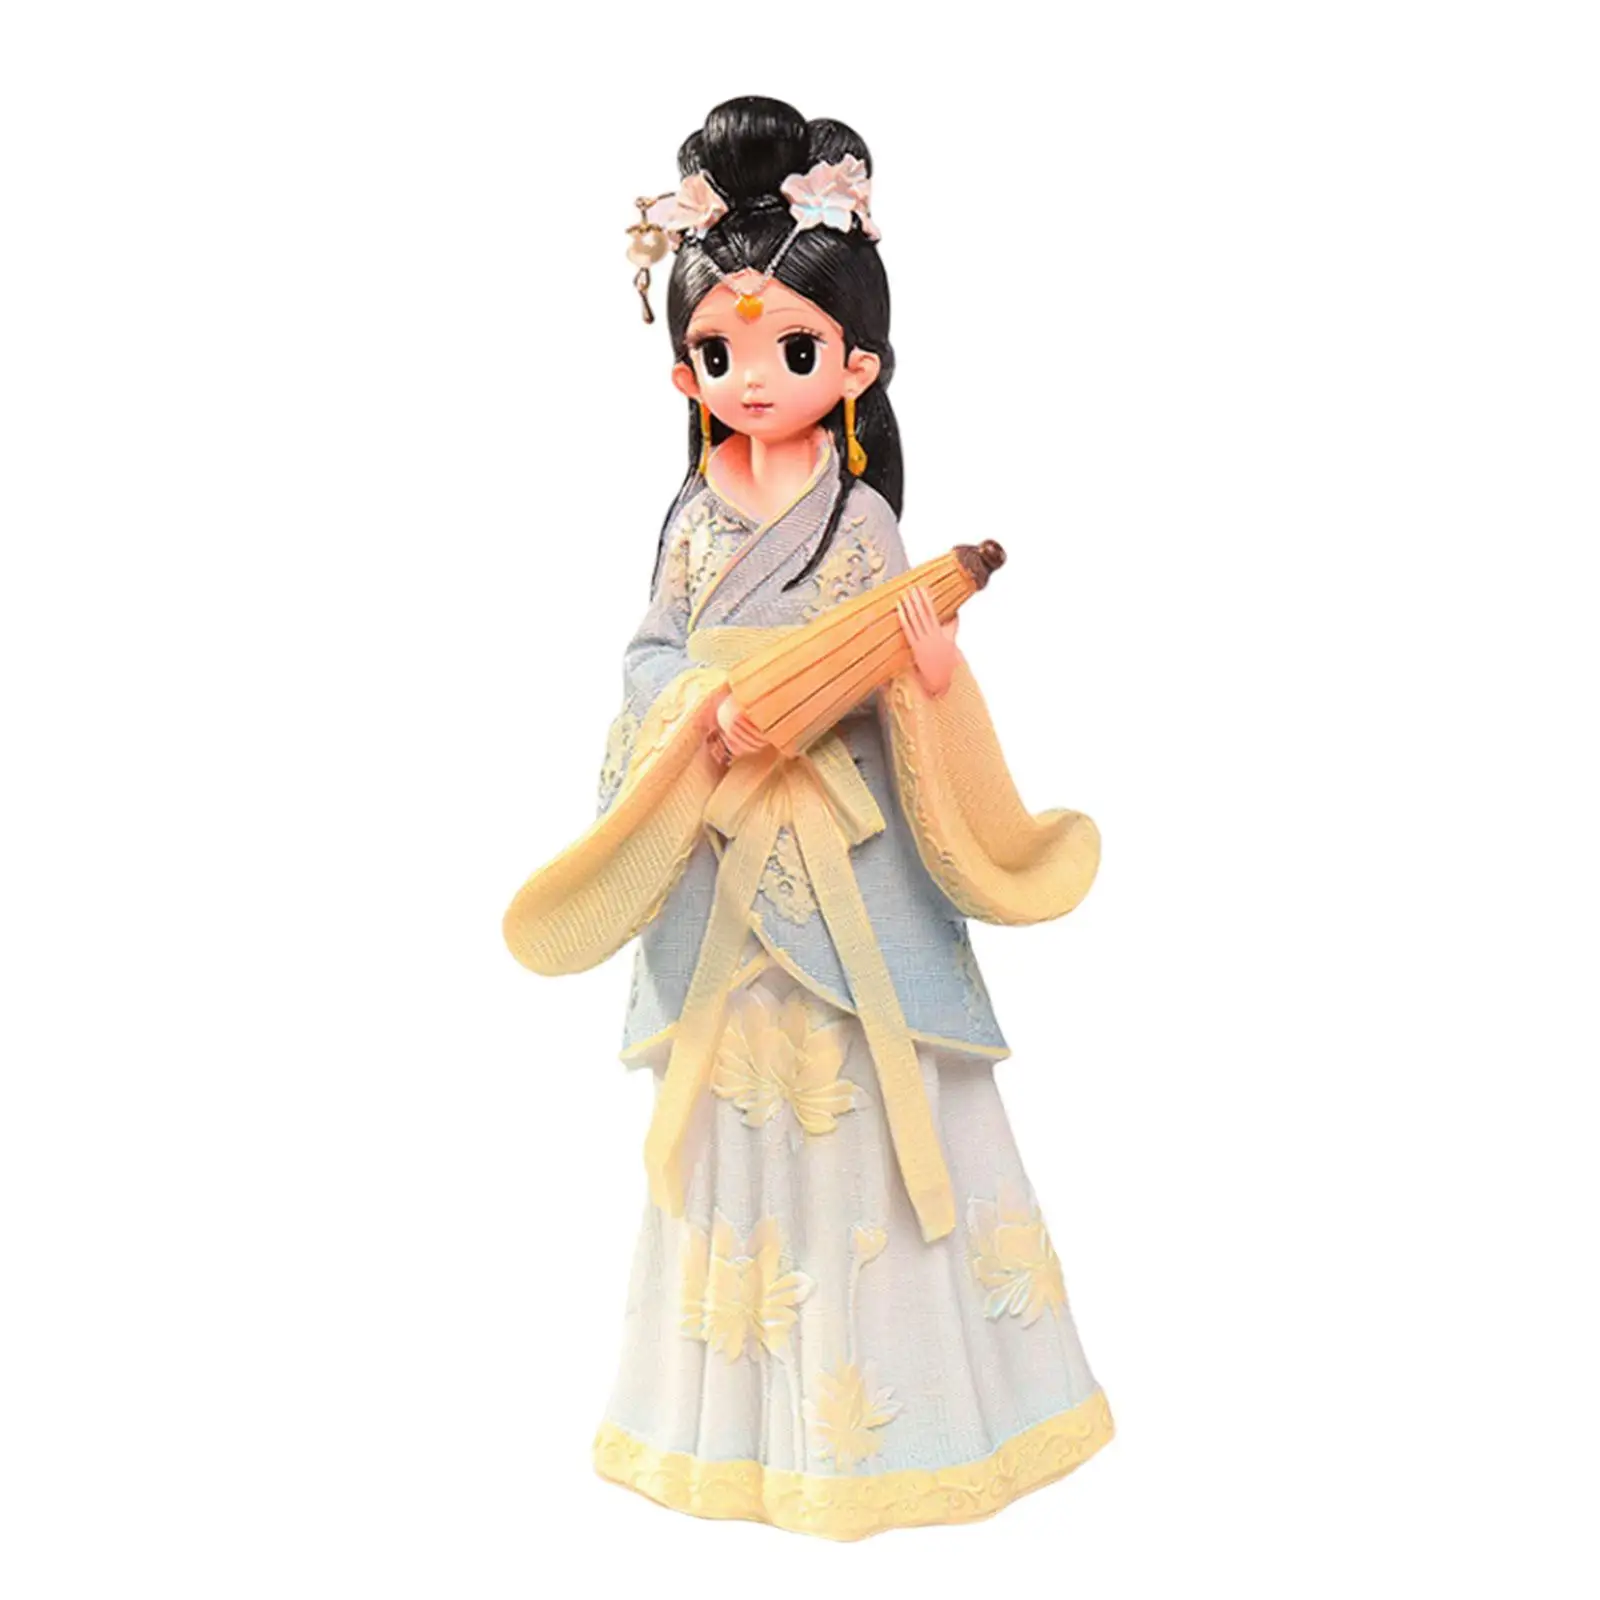 Girl Figurine Chinese Costume Collection Ornament for Photo Props Home Decor Car